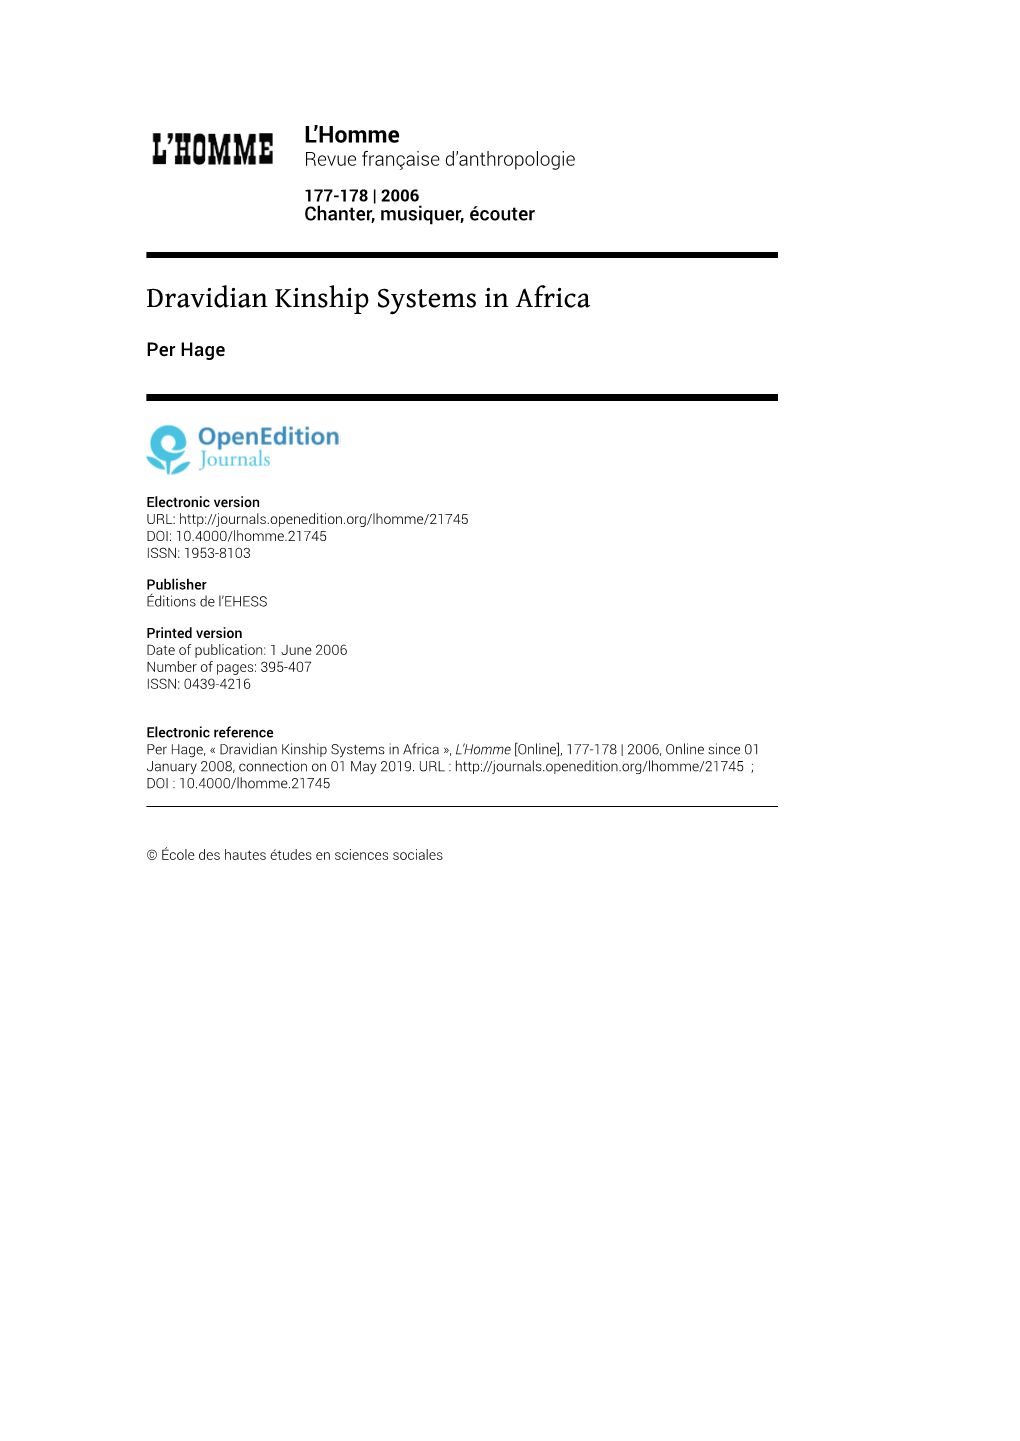 Dravidian Kinship Systems in Africa